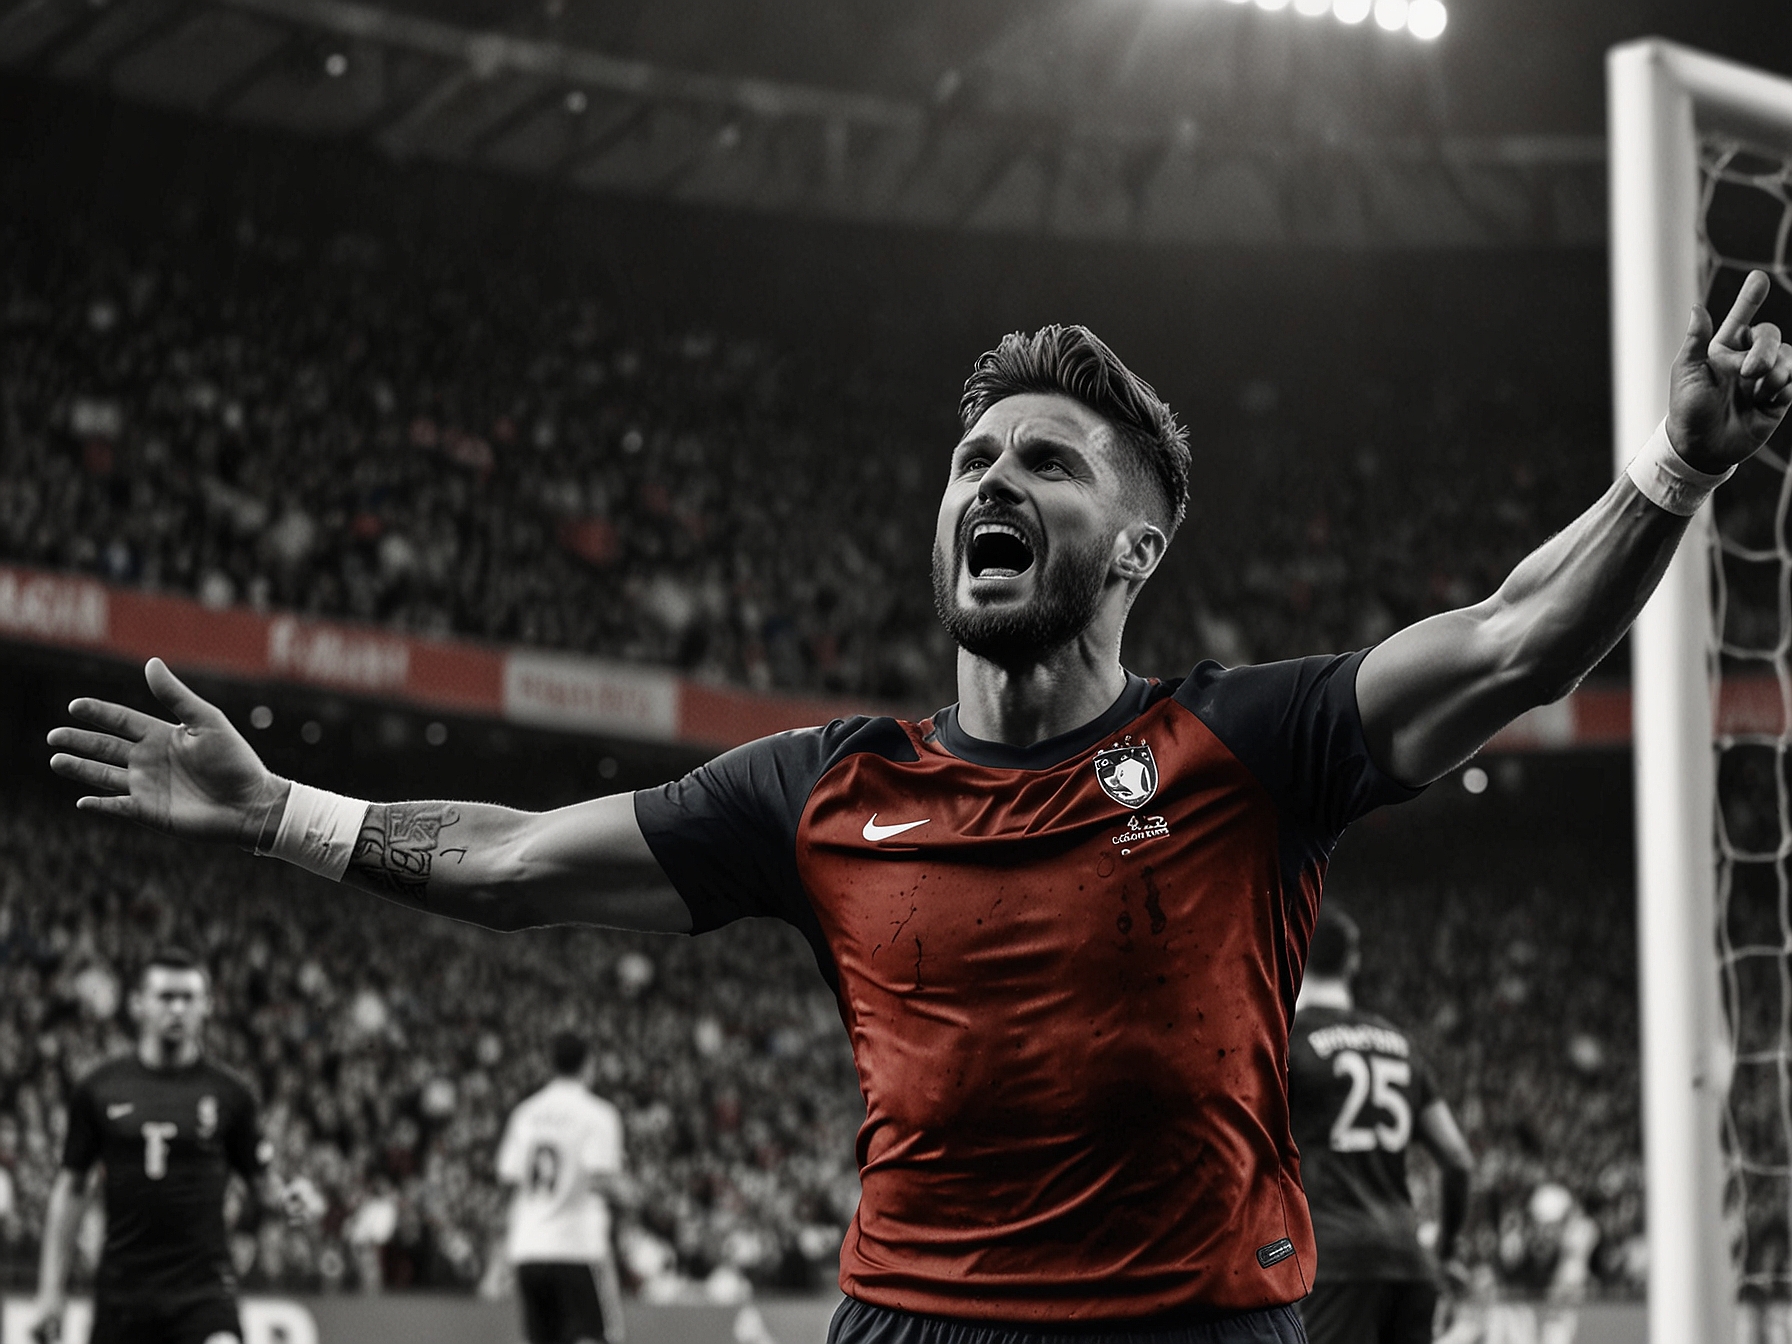 Olivier Giroud celebrating after scoring the match-winning goal for France in the 67th minute with joyful French fans in the background at Duesseldorf Arena.